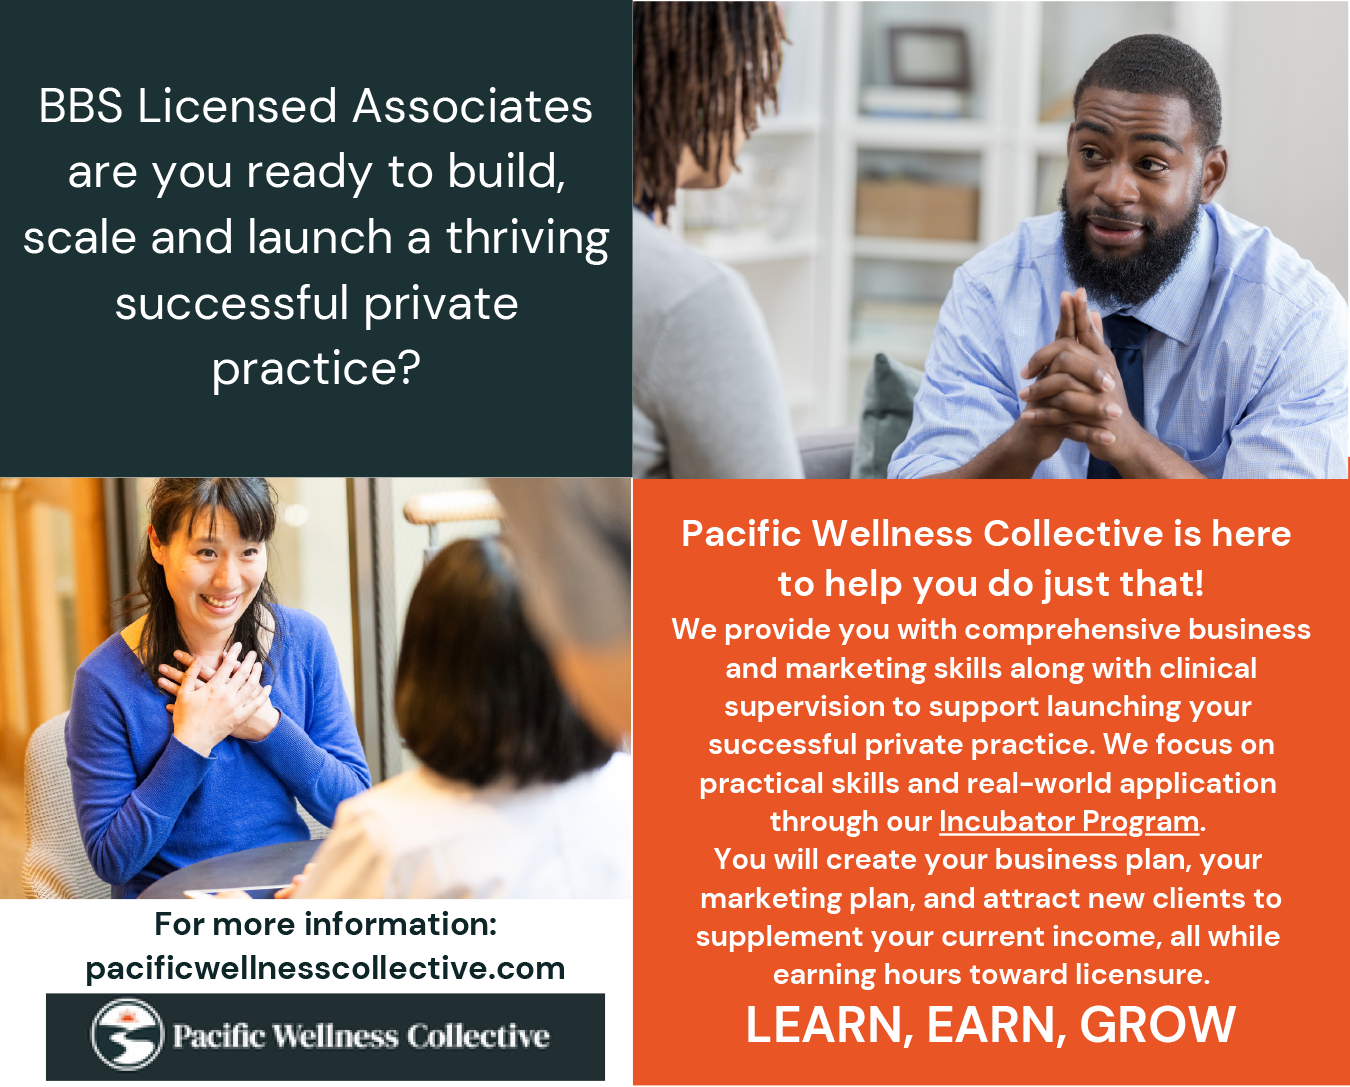 Pacific Wellness Collective